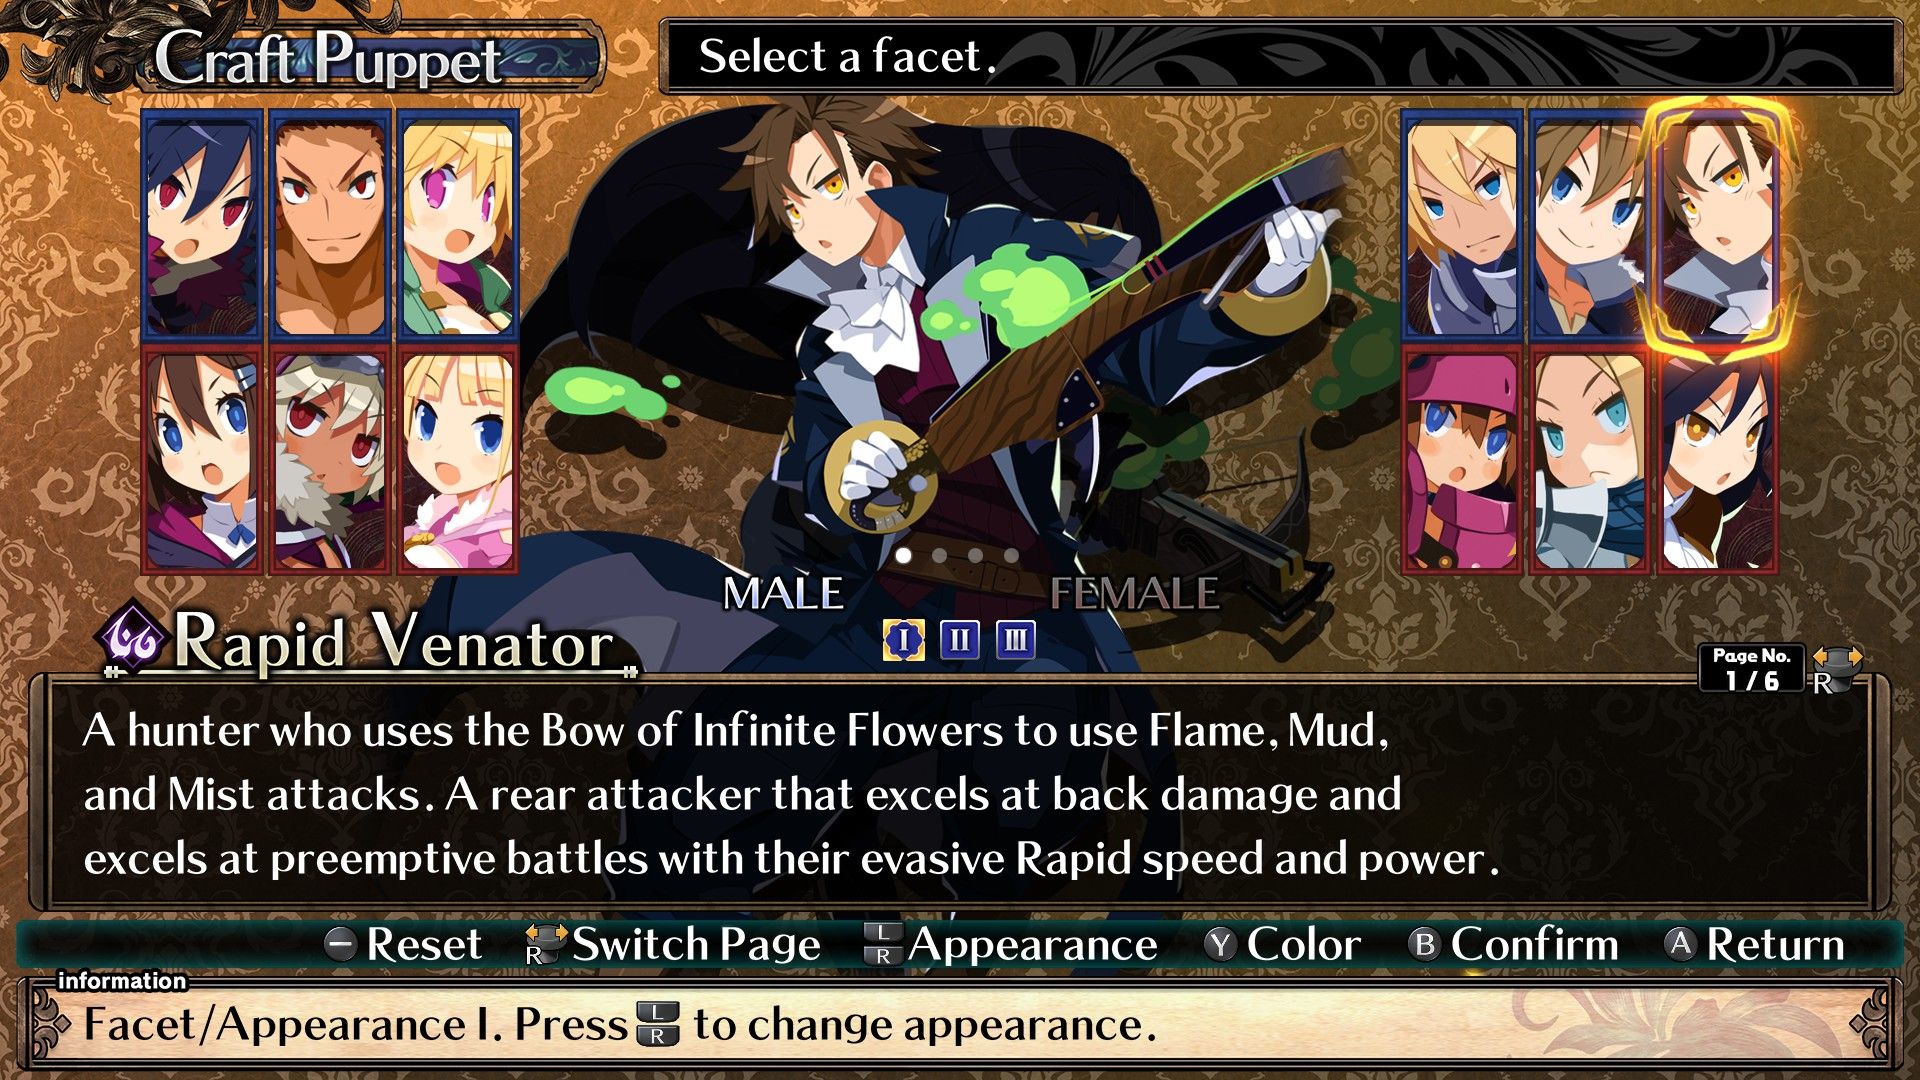 Labyrinth Of Galleria: The Moon Society Rapid Venator character creation screen showing the male character and class description.